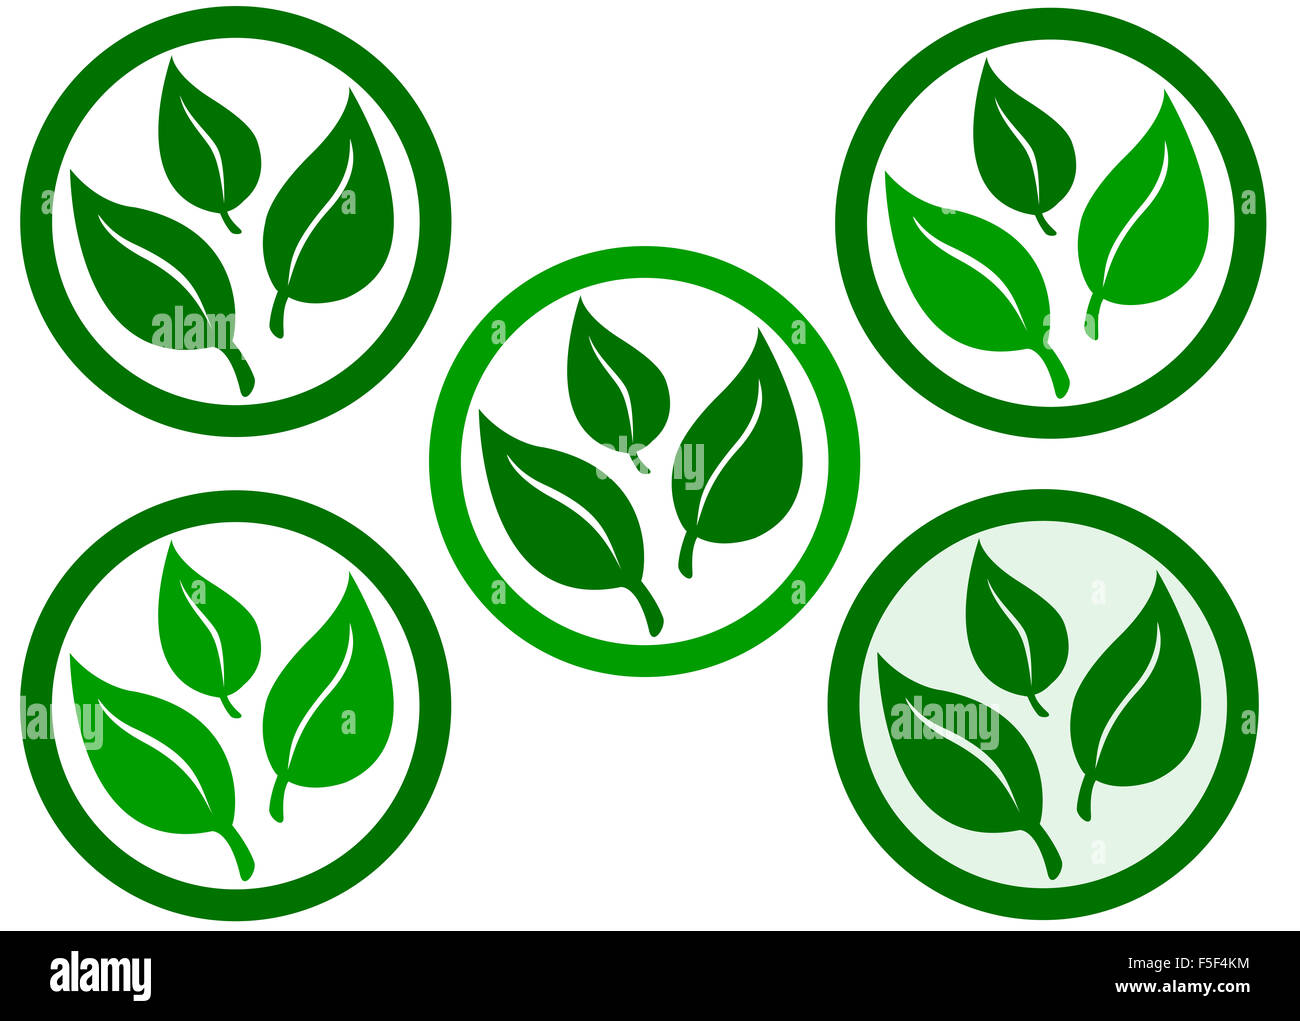 ecologic or natural product icon Stock Photo